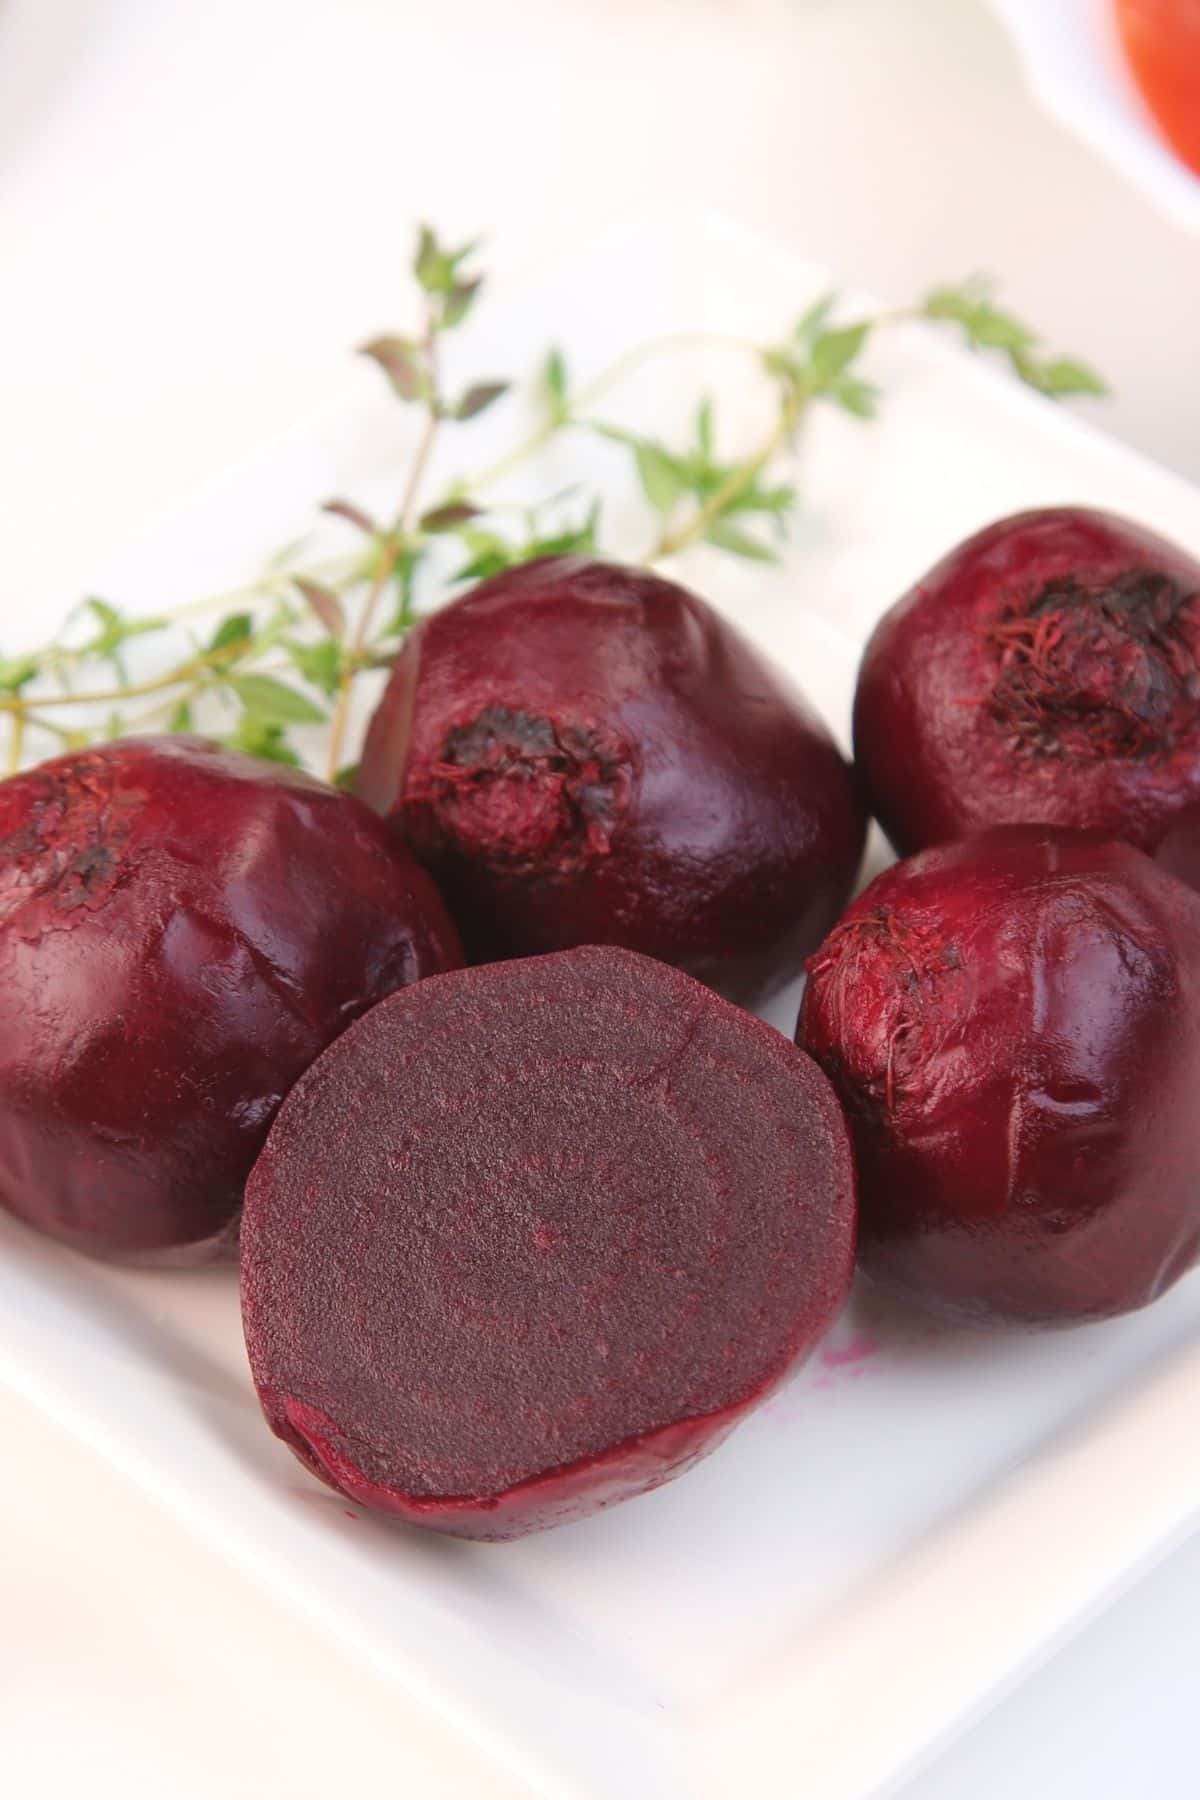 instant pot red beets served whole on a white plate.